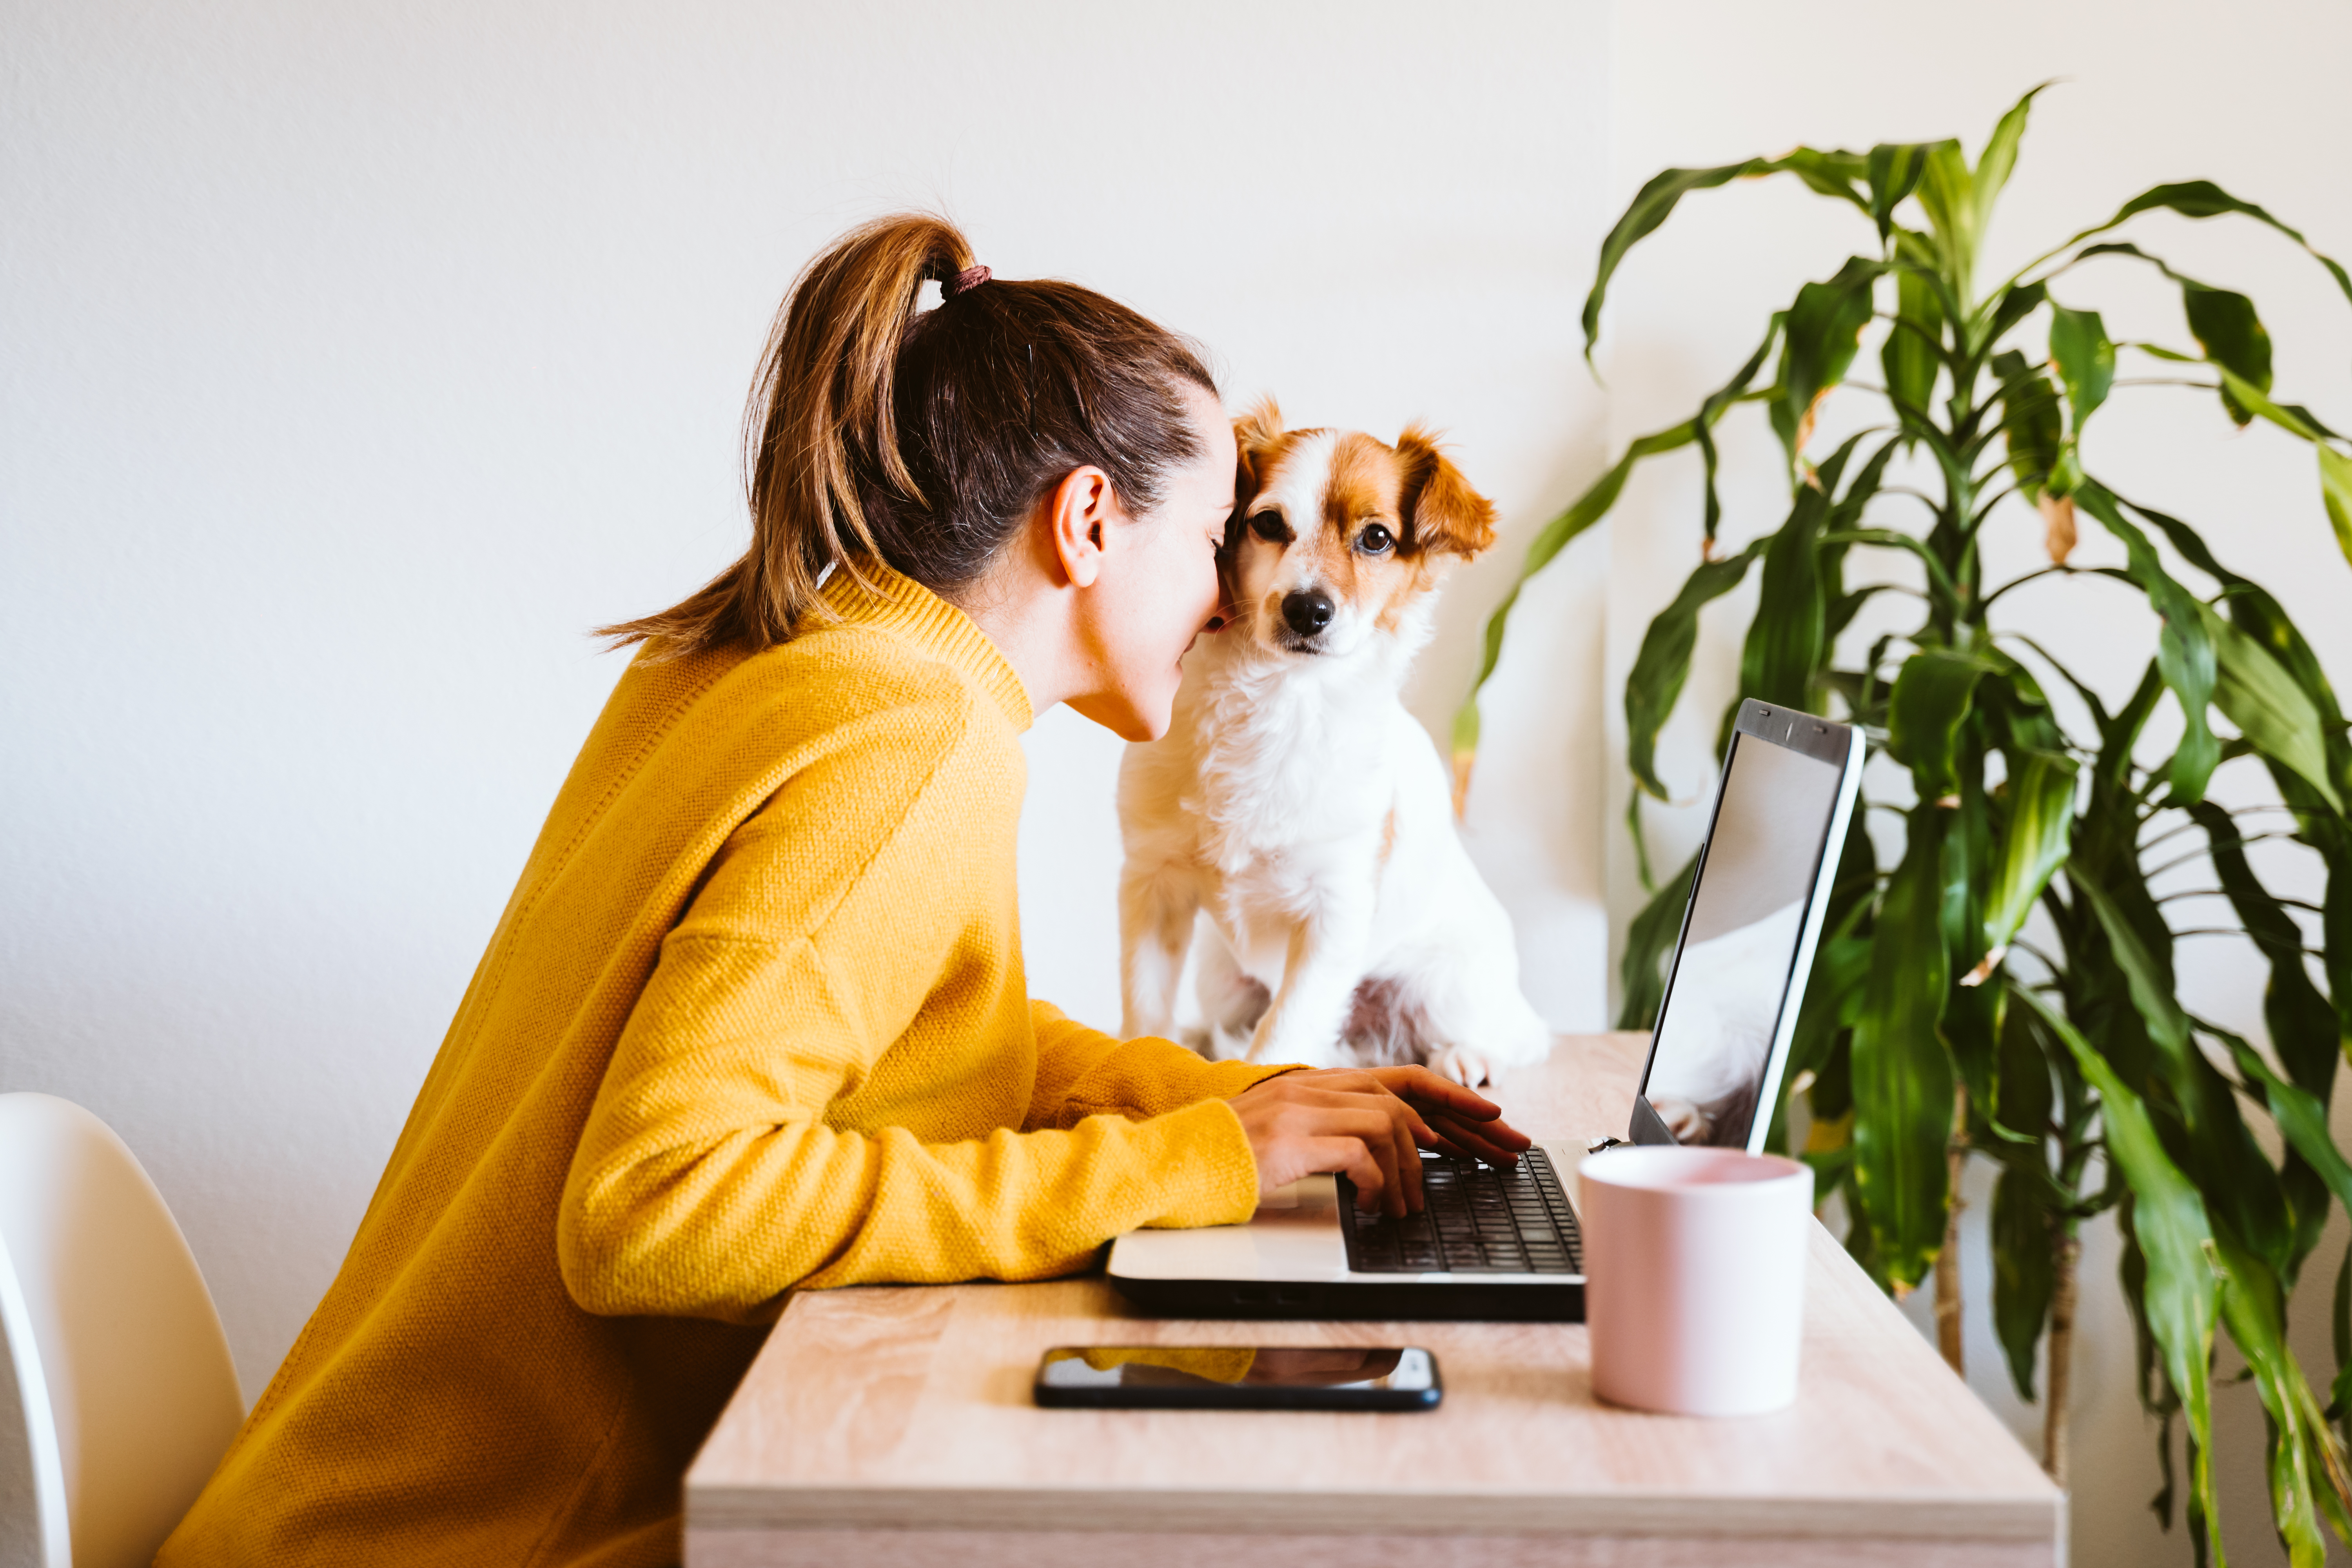 young woman working on laptop at home,cute small dog besides. work from home, stay safe during coronavirus covid-2019